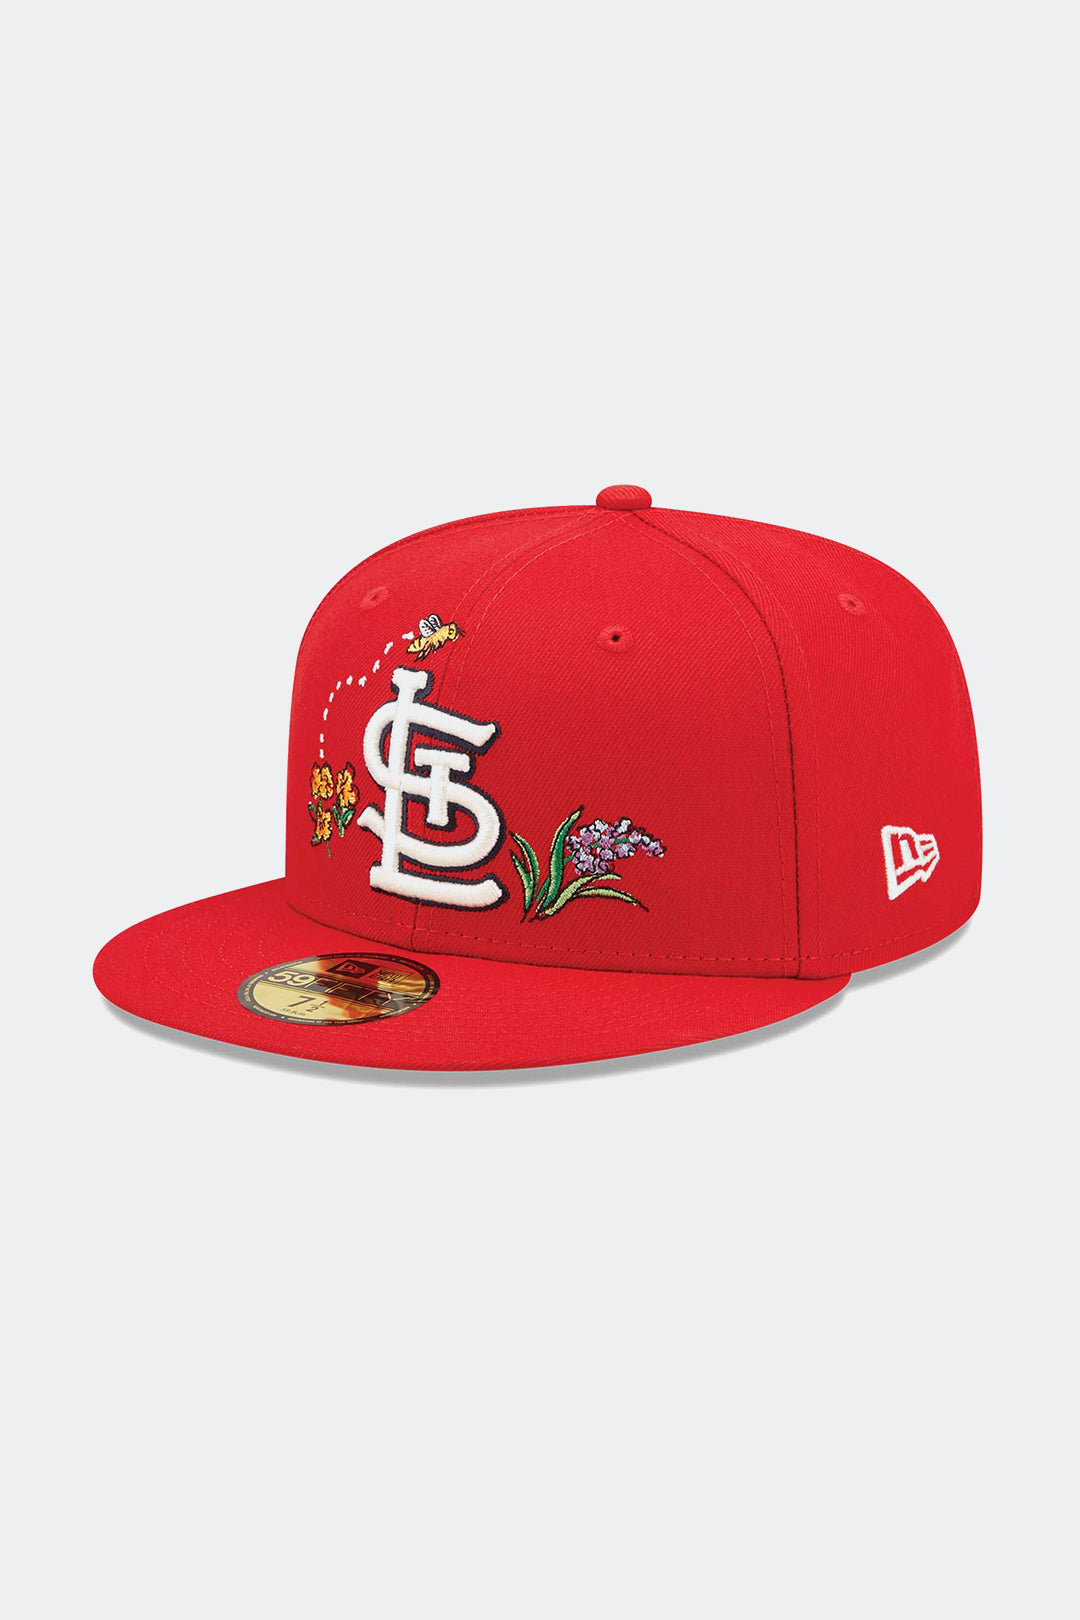 NEW ERA 59FIFTY ST LOUIS CARDINALS "WATERCOLOR FLORAL" - HYPE